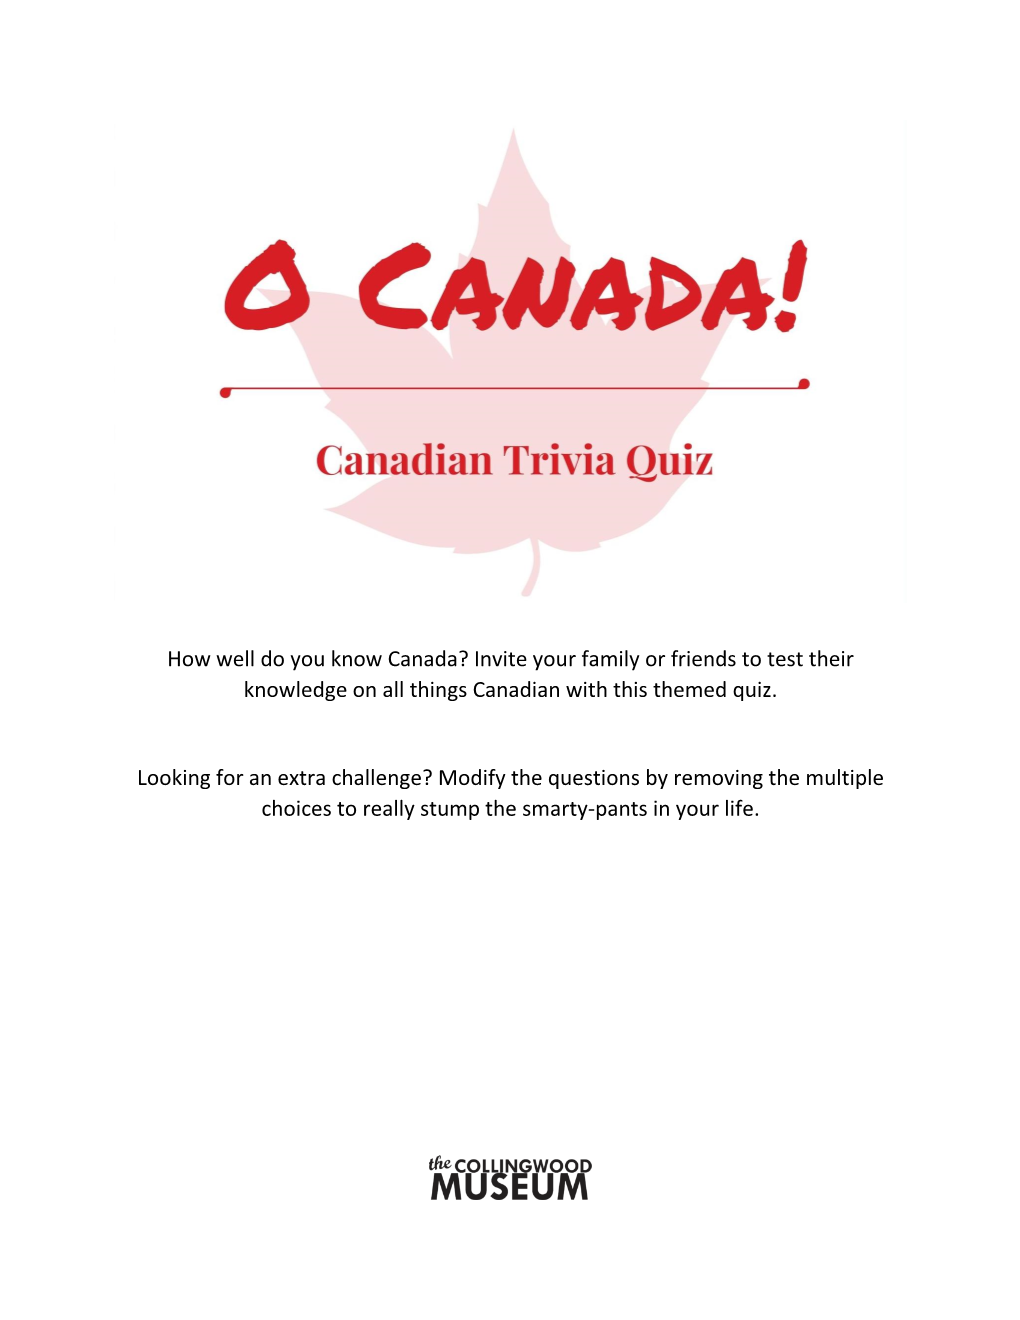 How Well Do You Know Canada? Invite Your Family Or Friends to Test Their Knowledge on All Things Canadian with This Themed Quiz